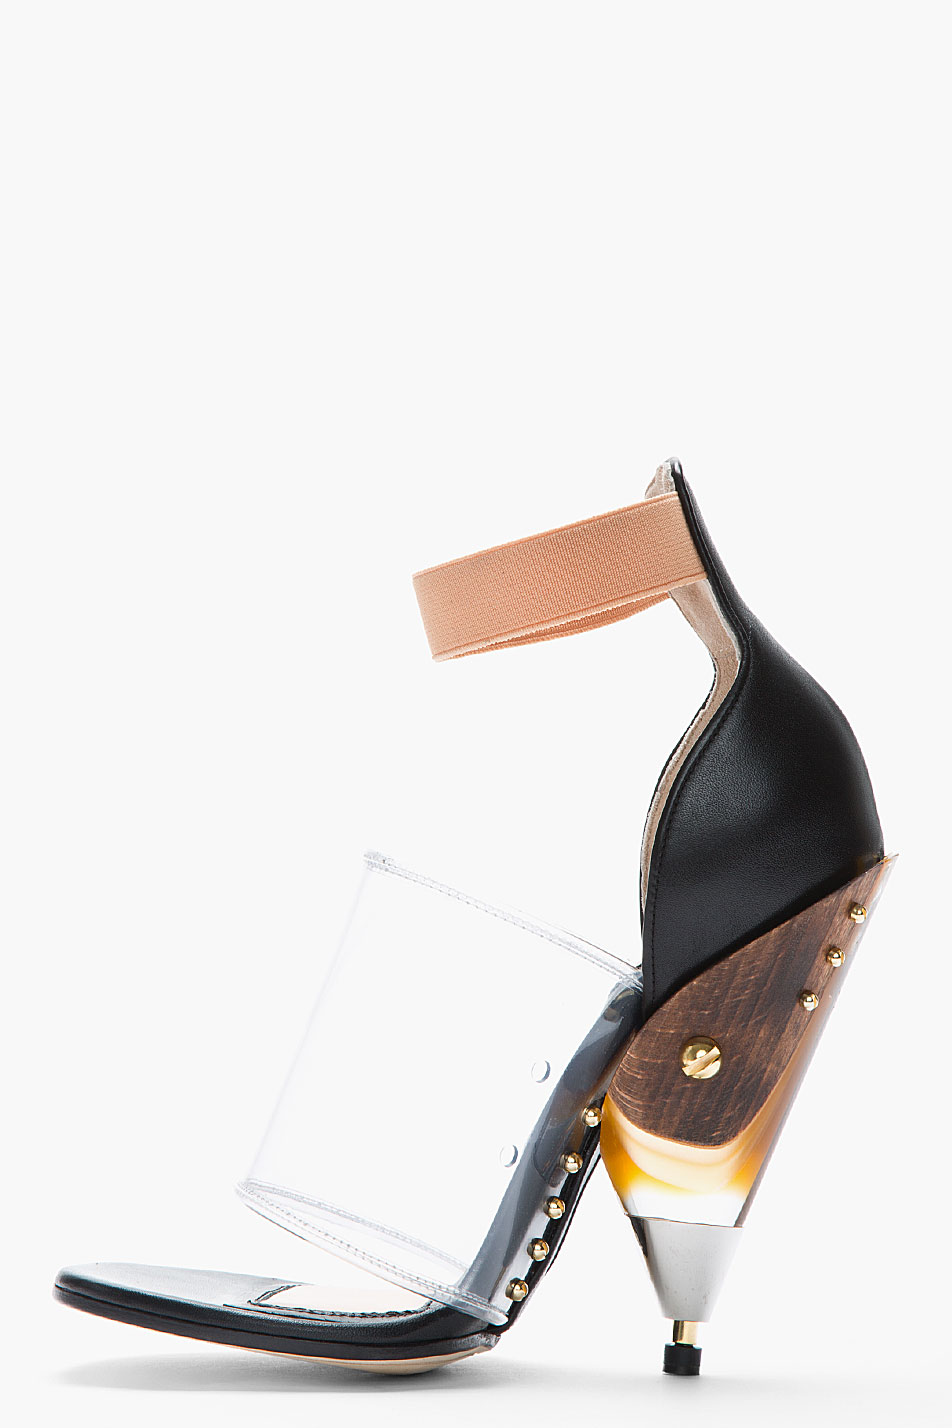 Lyst - Givenchy Black and Transparent Albertina Podium Heels in Black